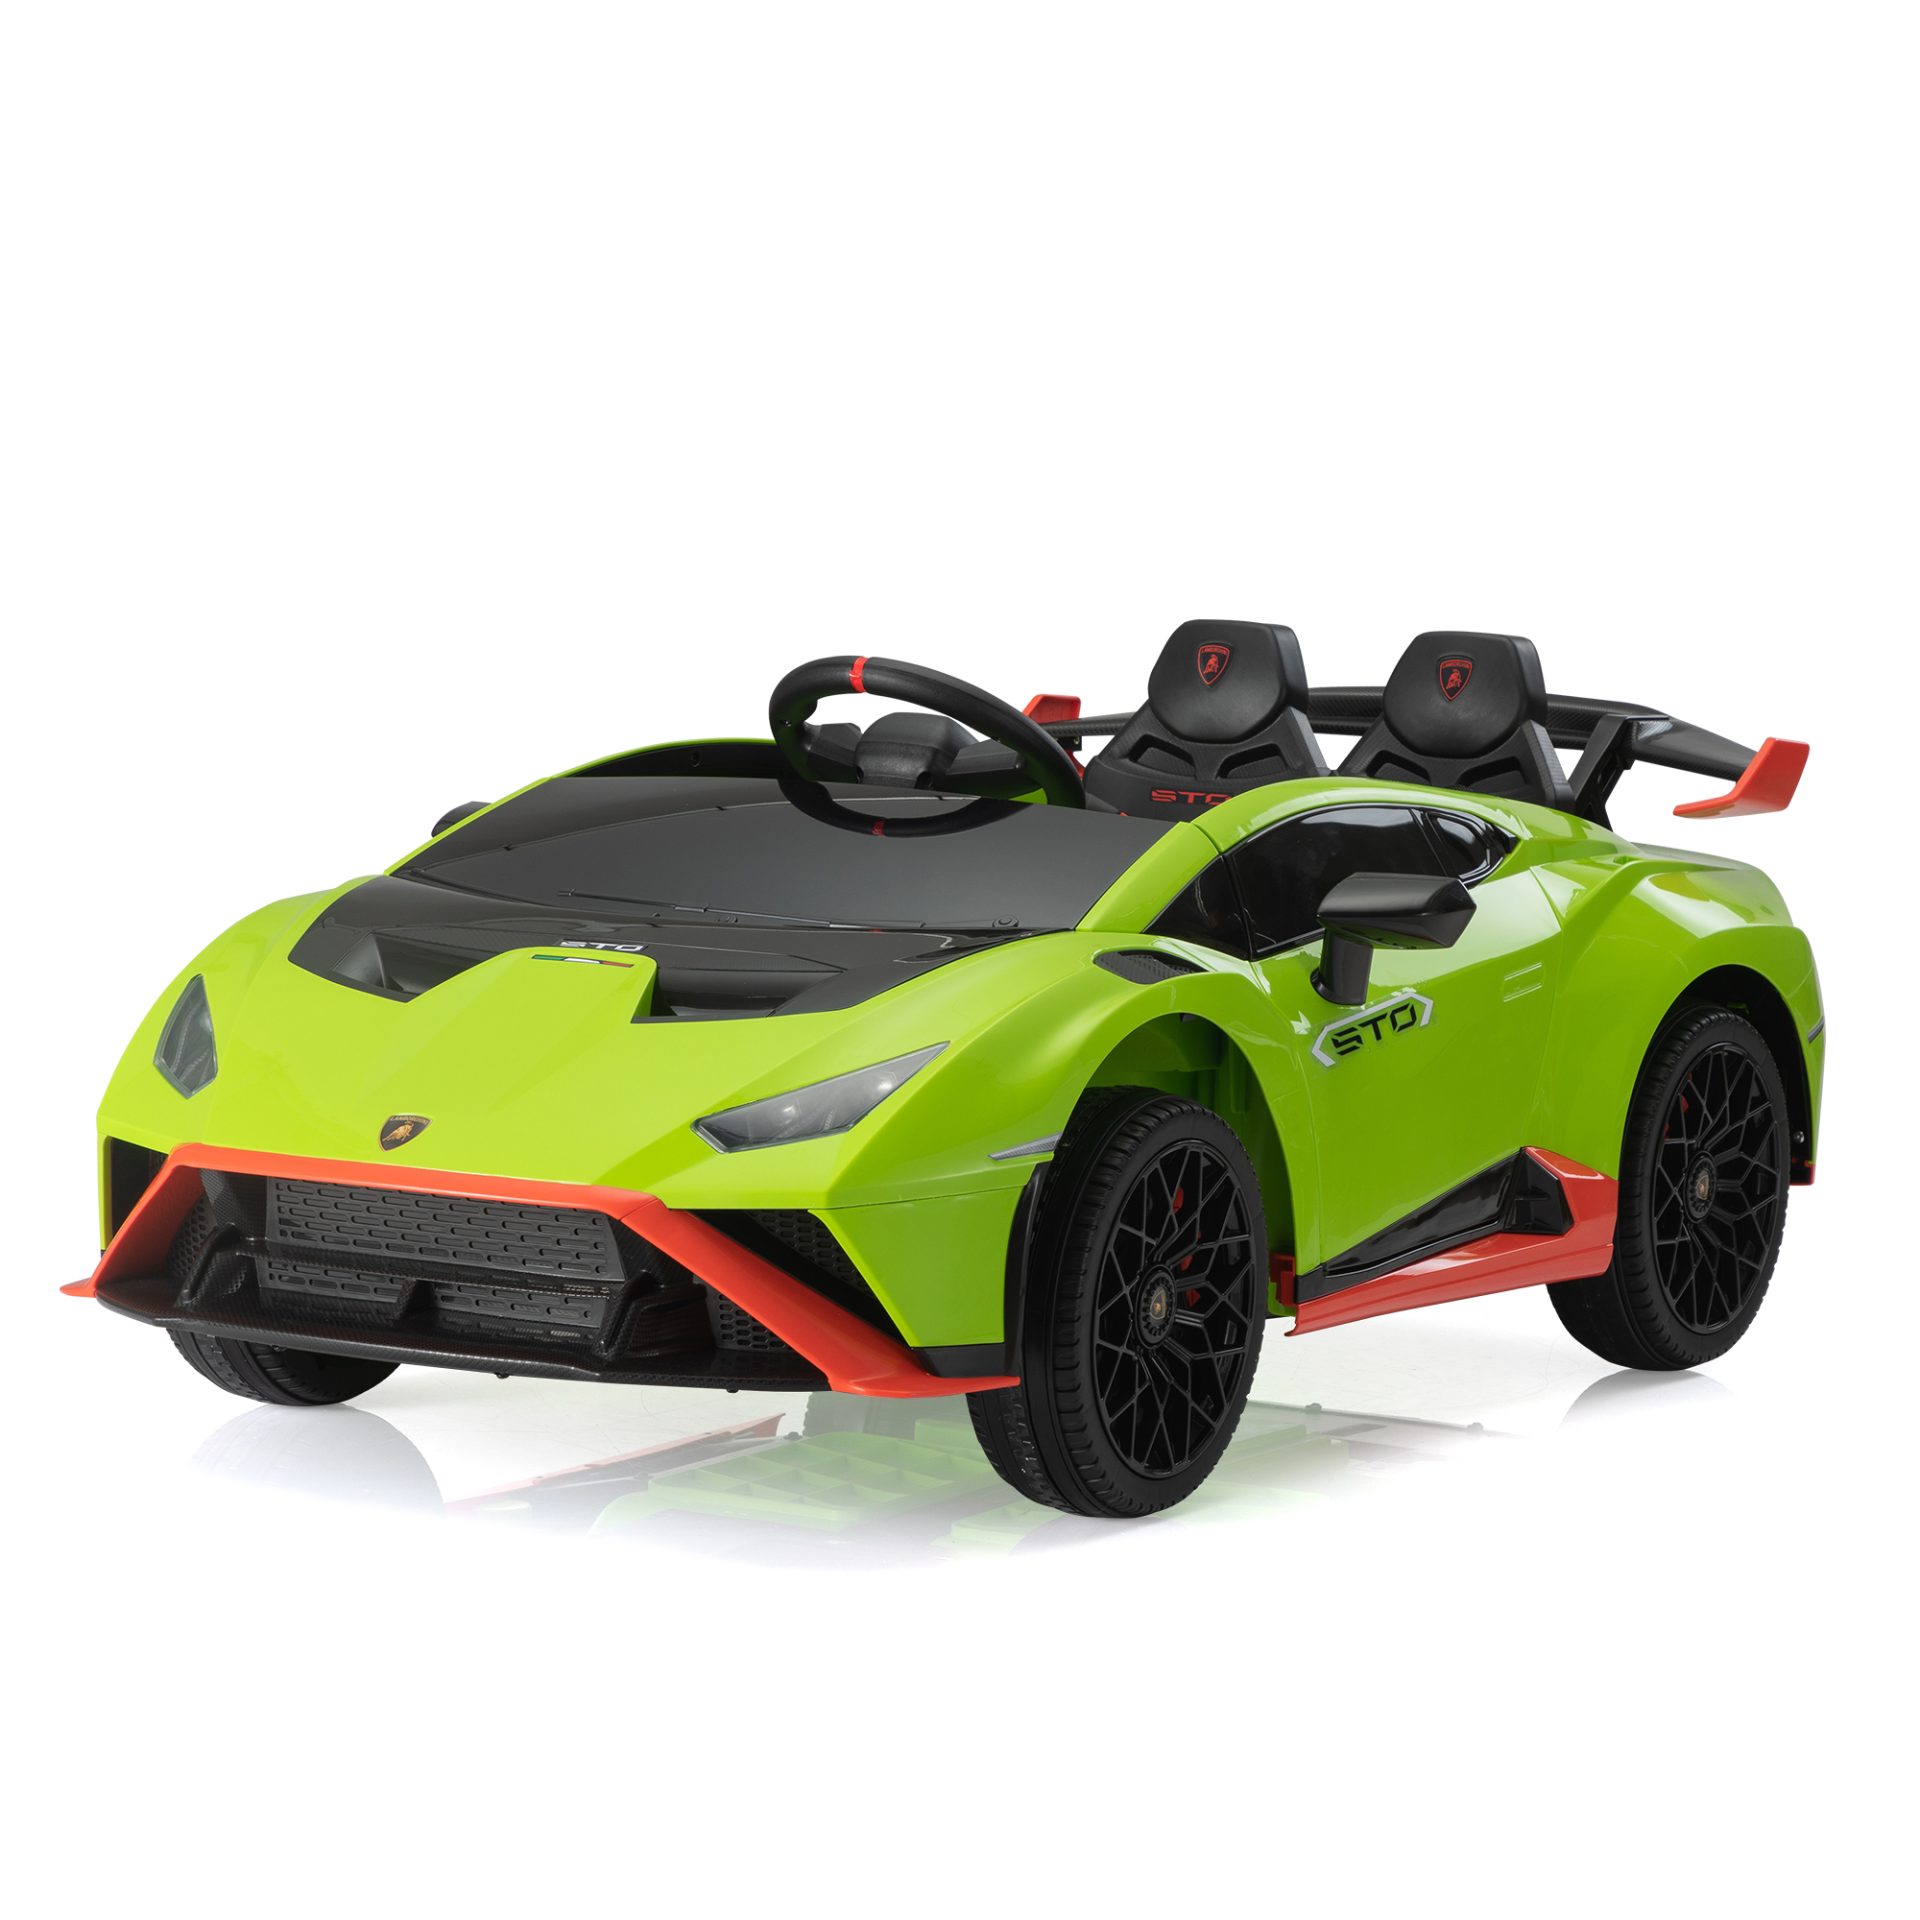 Tobbi 12V Licensed Lamborghini Sto Kids Electric Ride On Car, Battery Powered Toy Car with Remote Control, Green